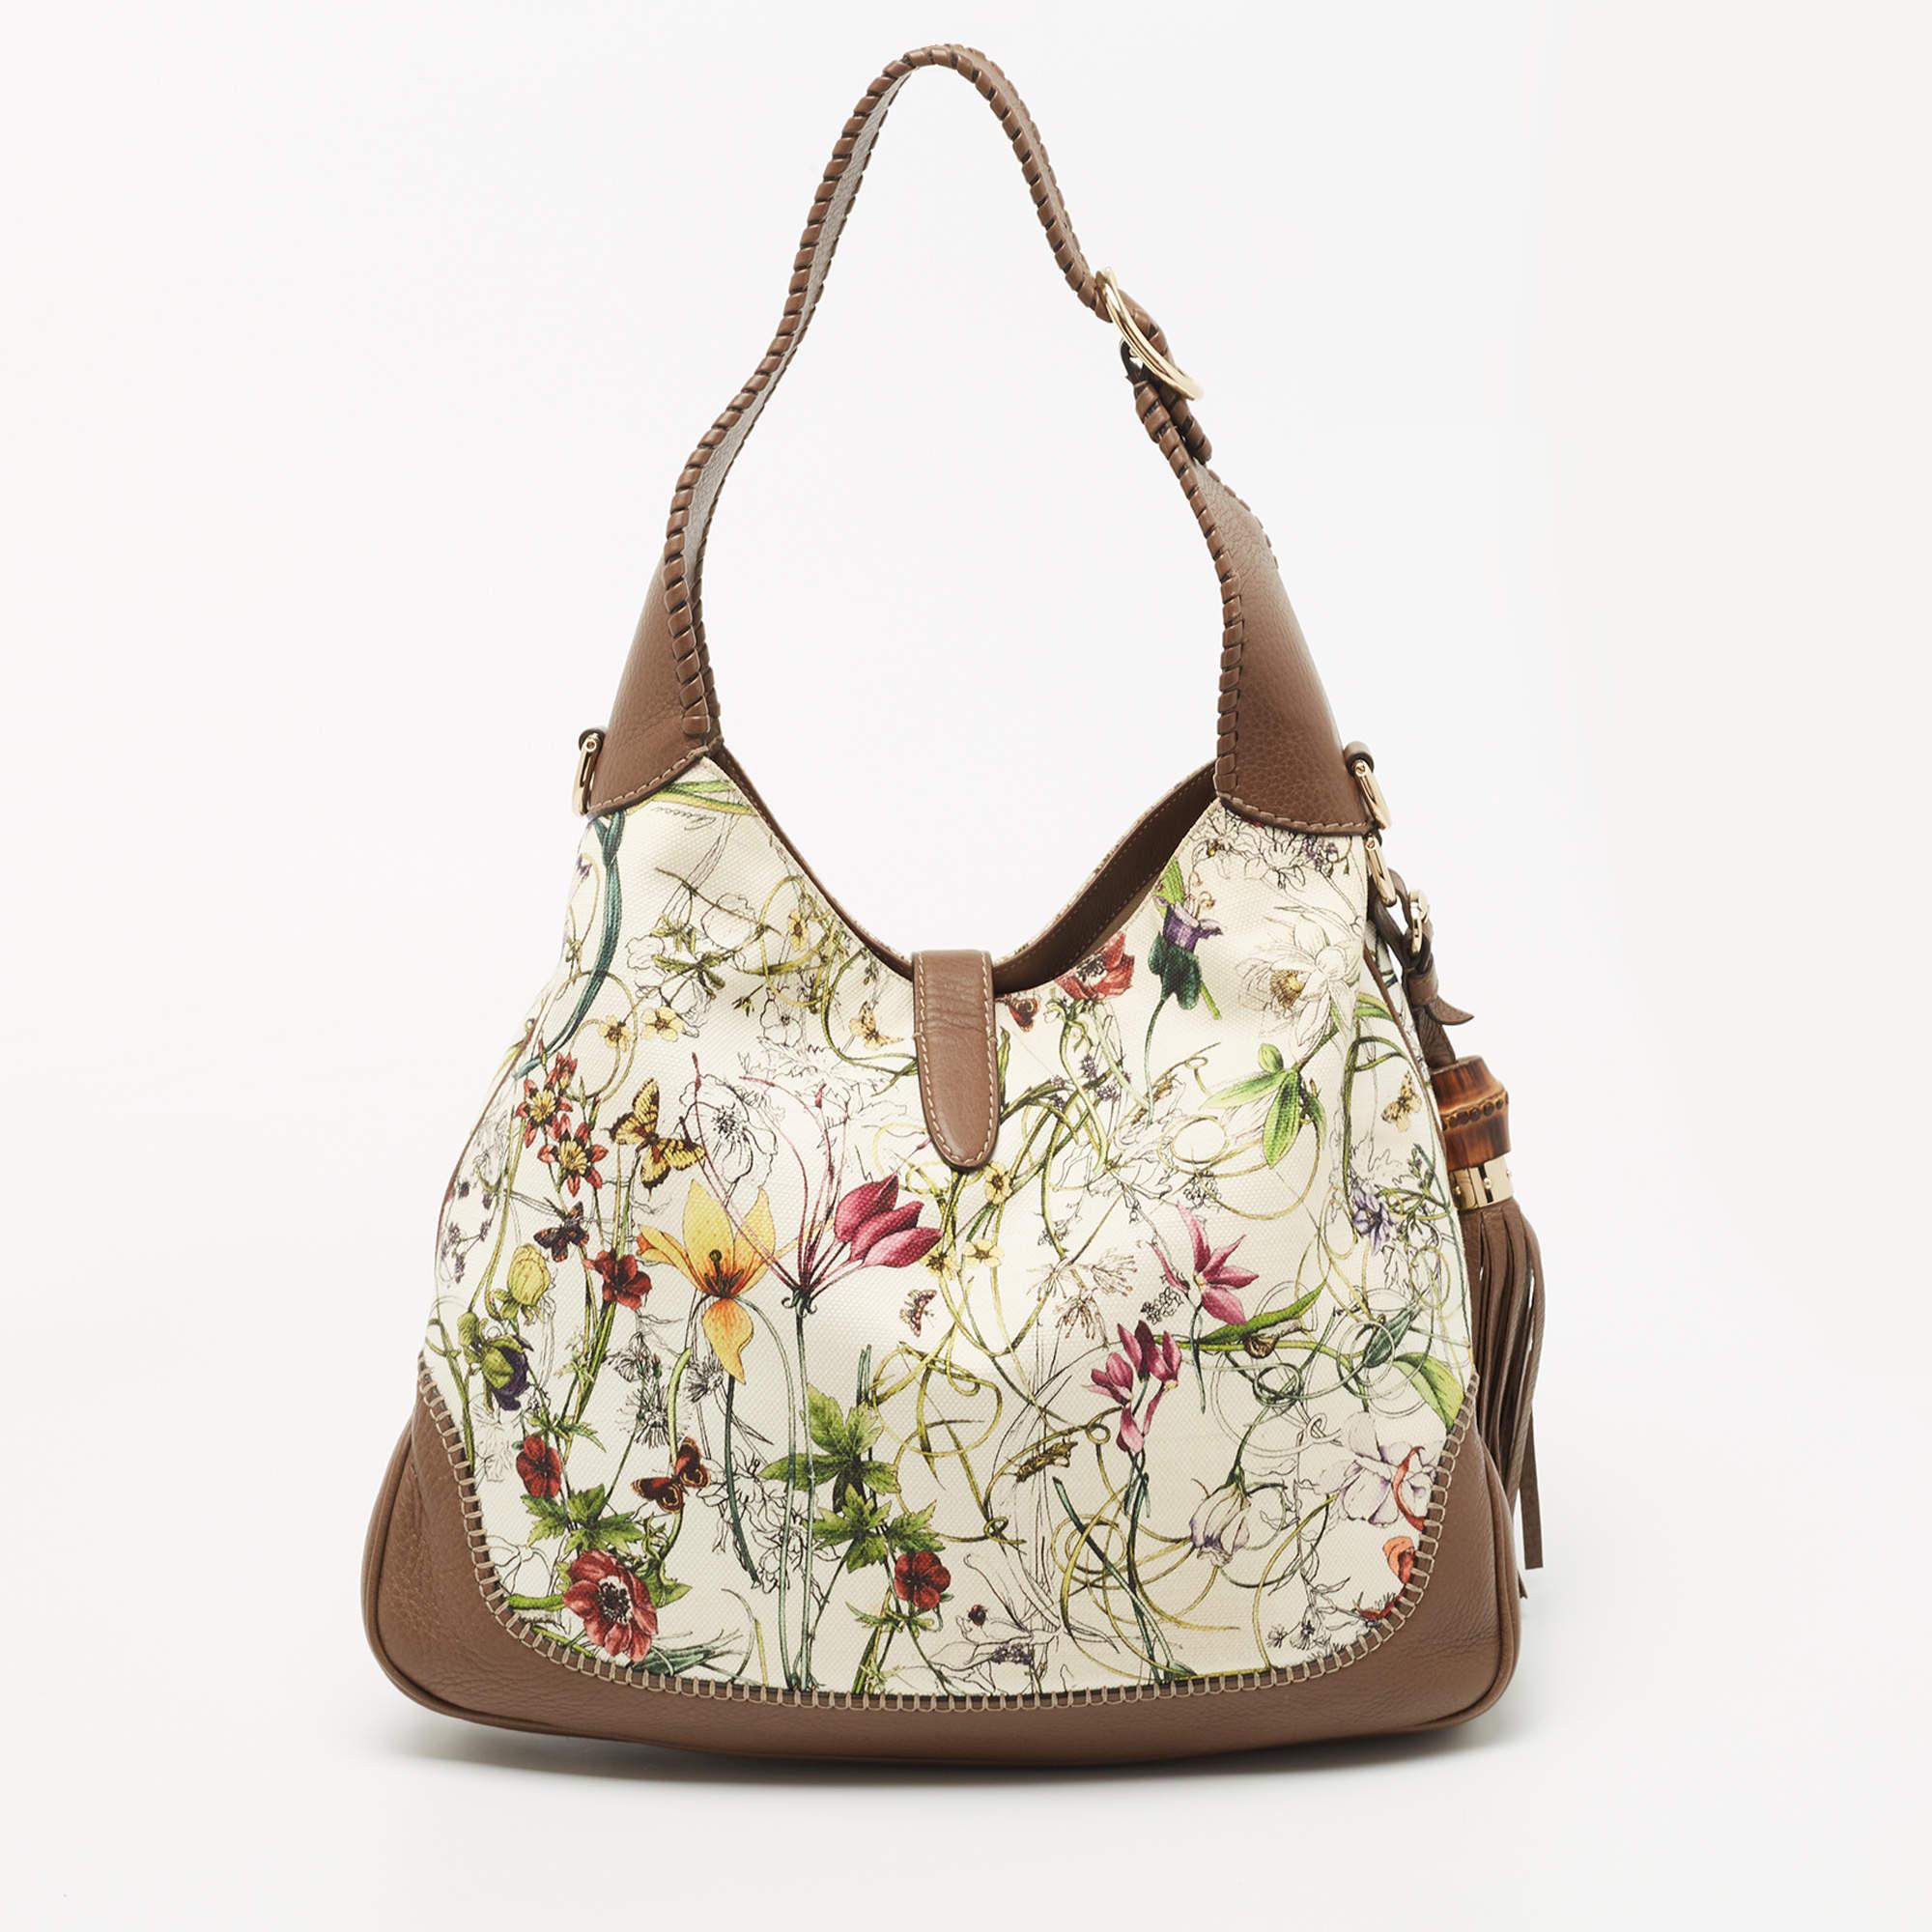 Take your style a notch higher with this understated yet fashionable hobo. Cut skillfully, the bag features a spacious interior. It is perfect for daily use!

Includes: Detachable Strap
